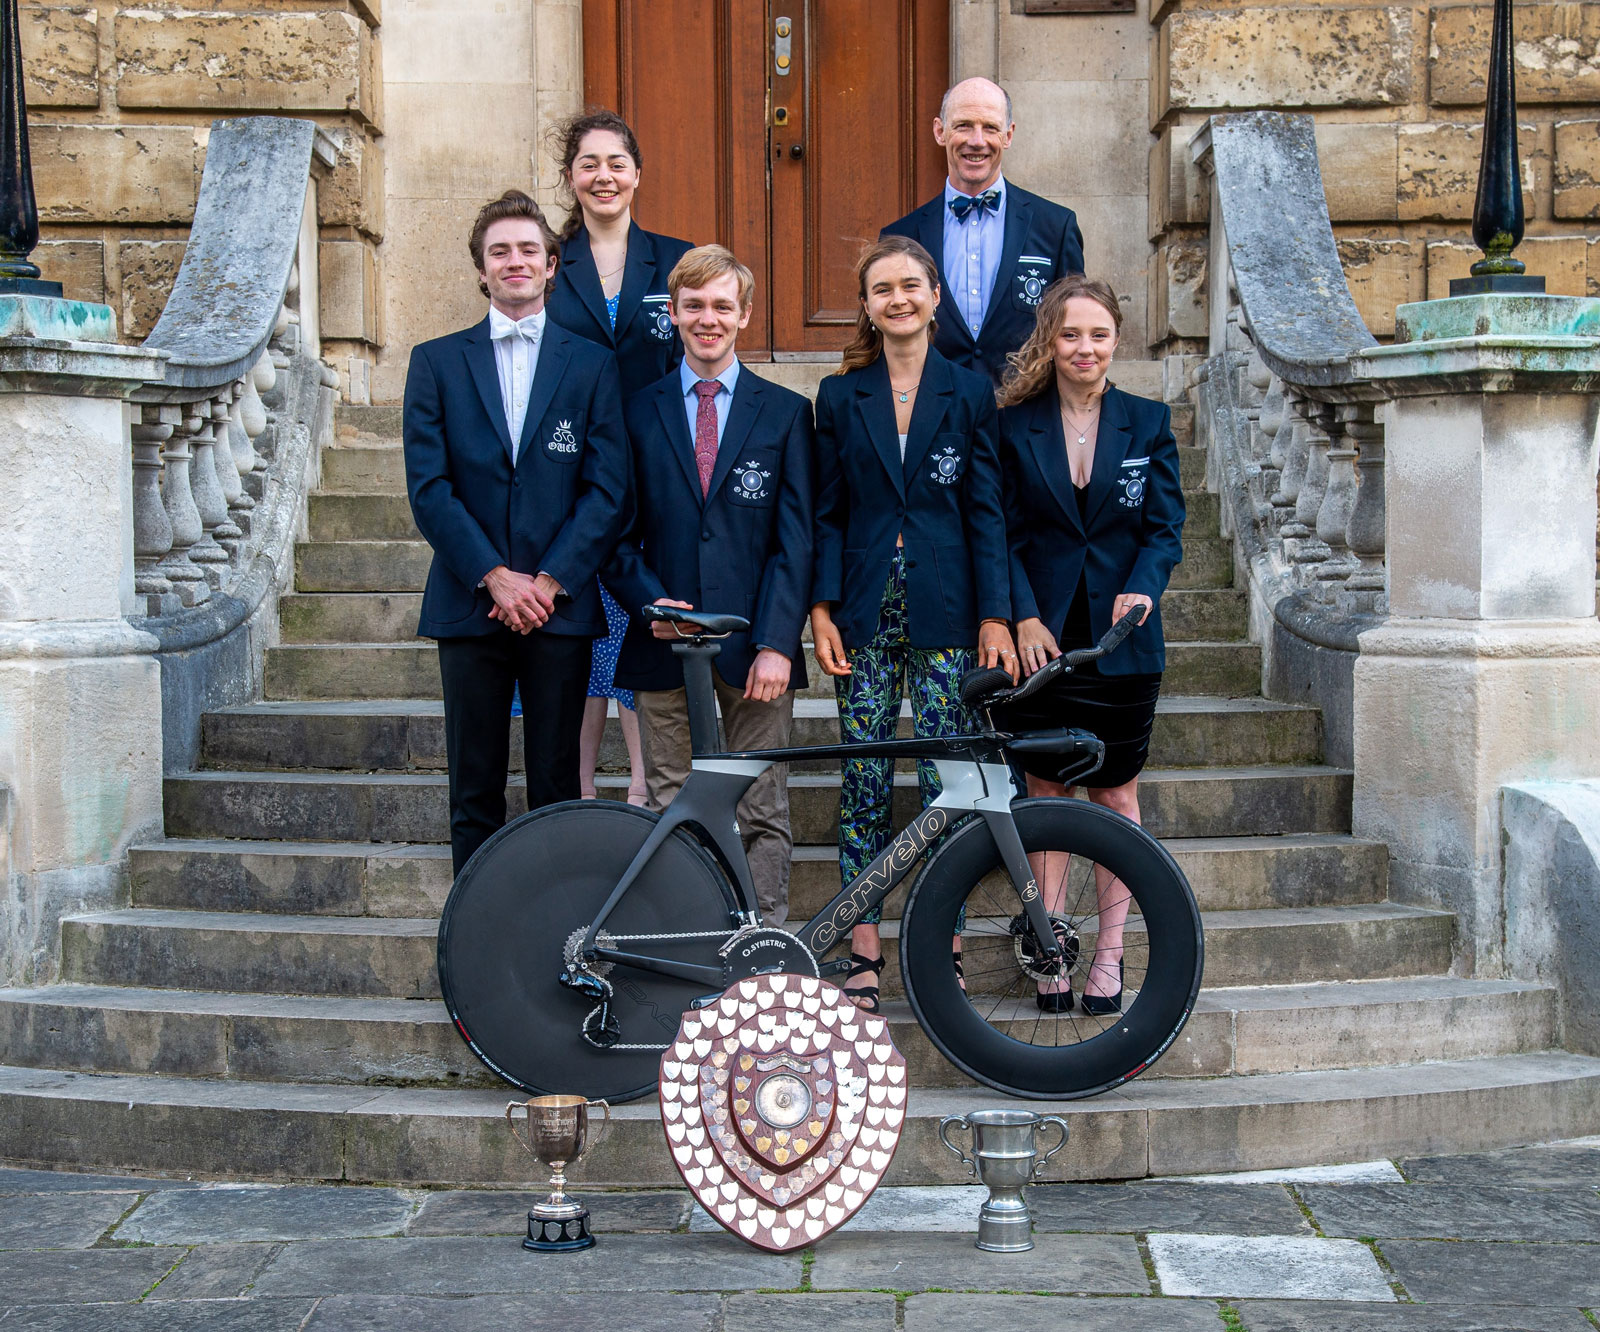 The six 2021/22 road cycling Varsity champions in club blazers on the steps to the Radcliffe Camera, posing with Varsity trophies & a time-trial bike.